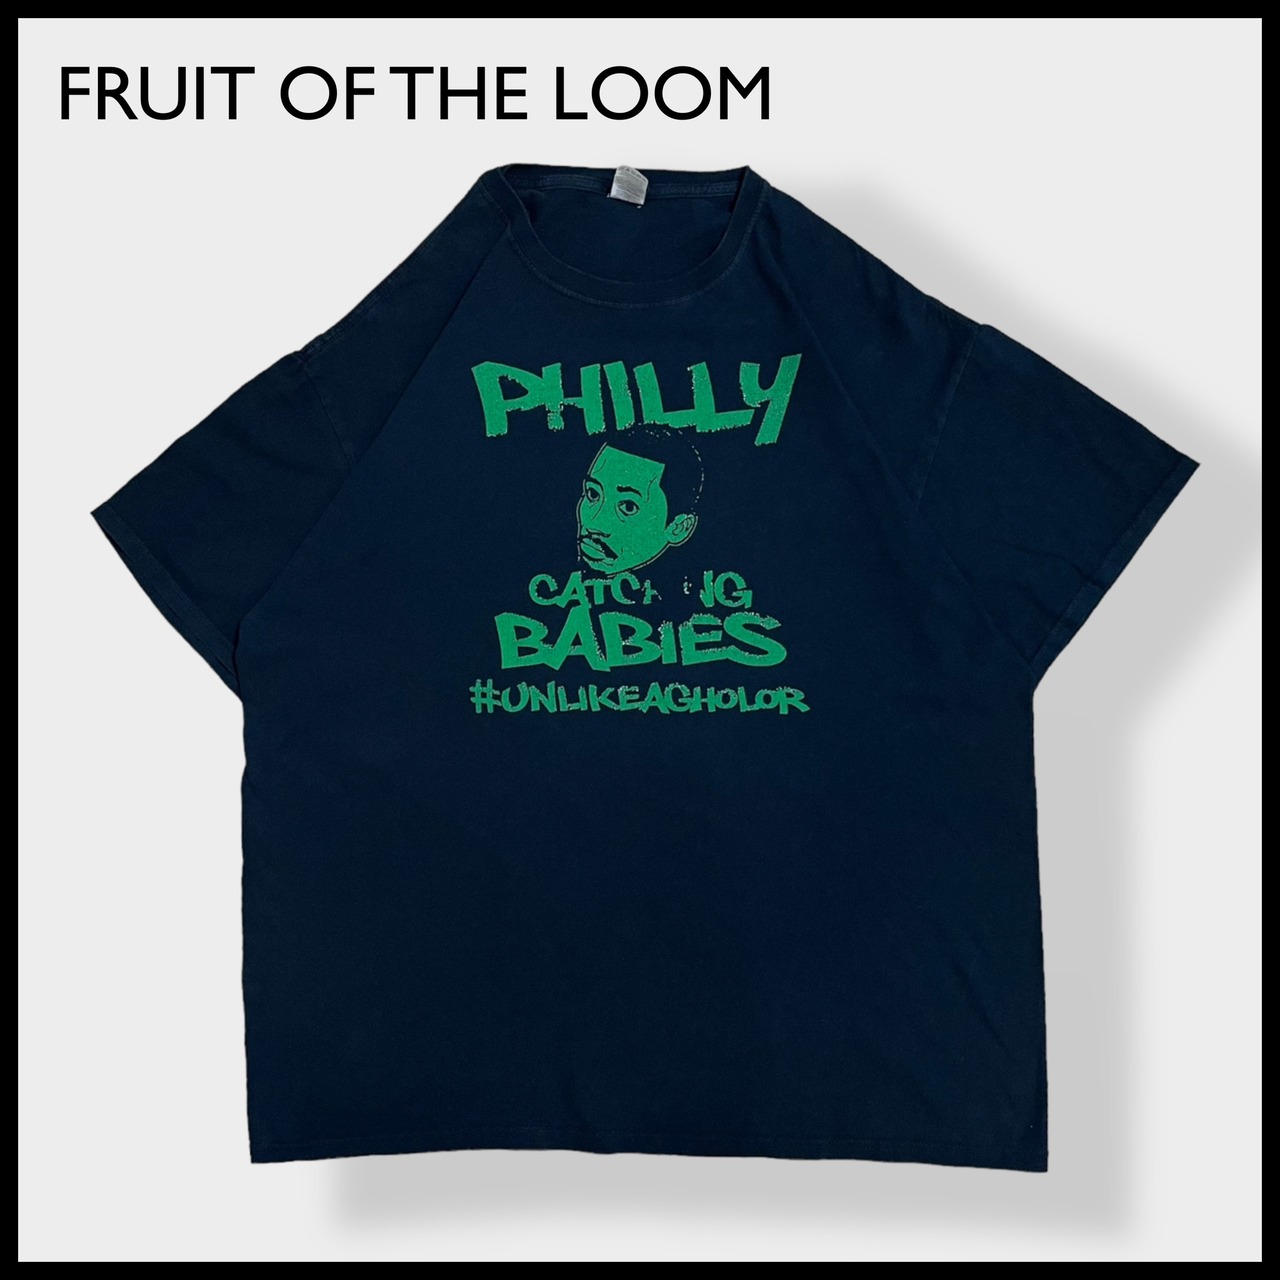 【FRUIT OF THE LOOM】プリント ロゴ Tシャツ t-shirt  半袖 黒 X-LARGE philly catching babies ビッグサイズ us古着